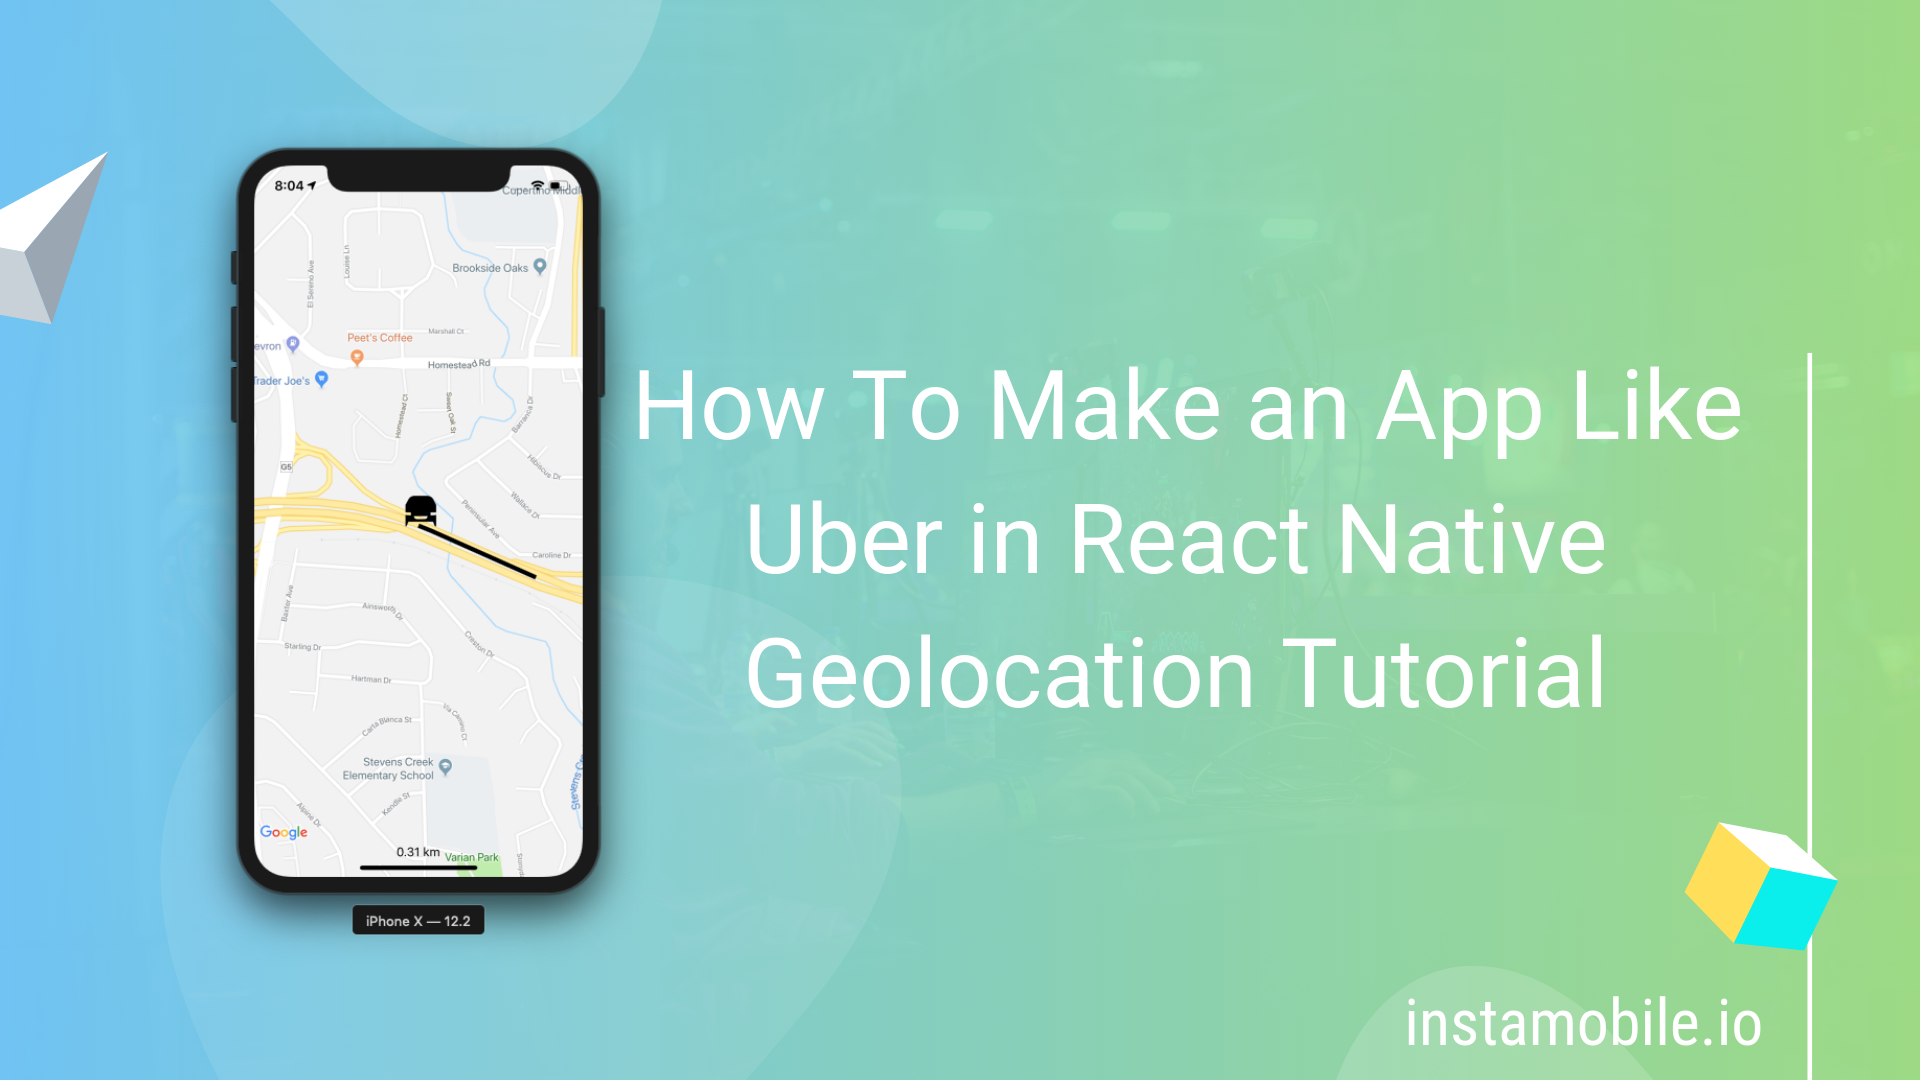 How To Make an App Like Uber in React Native | Geolocation Tutorial